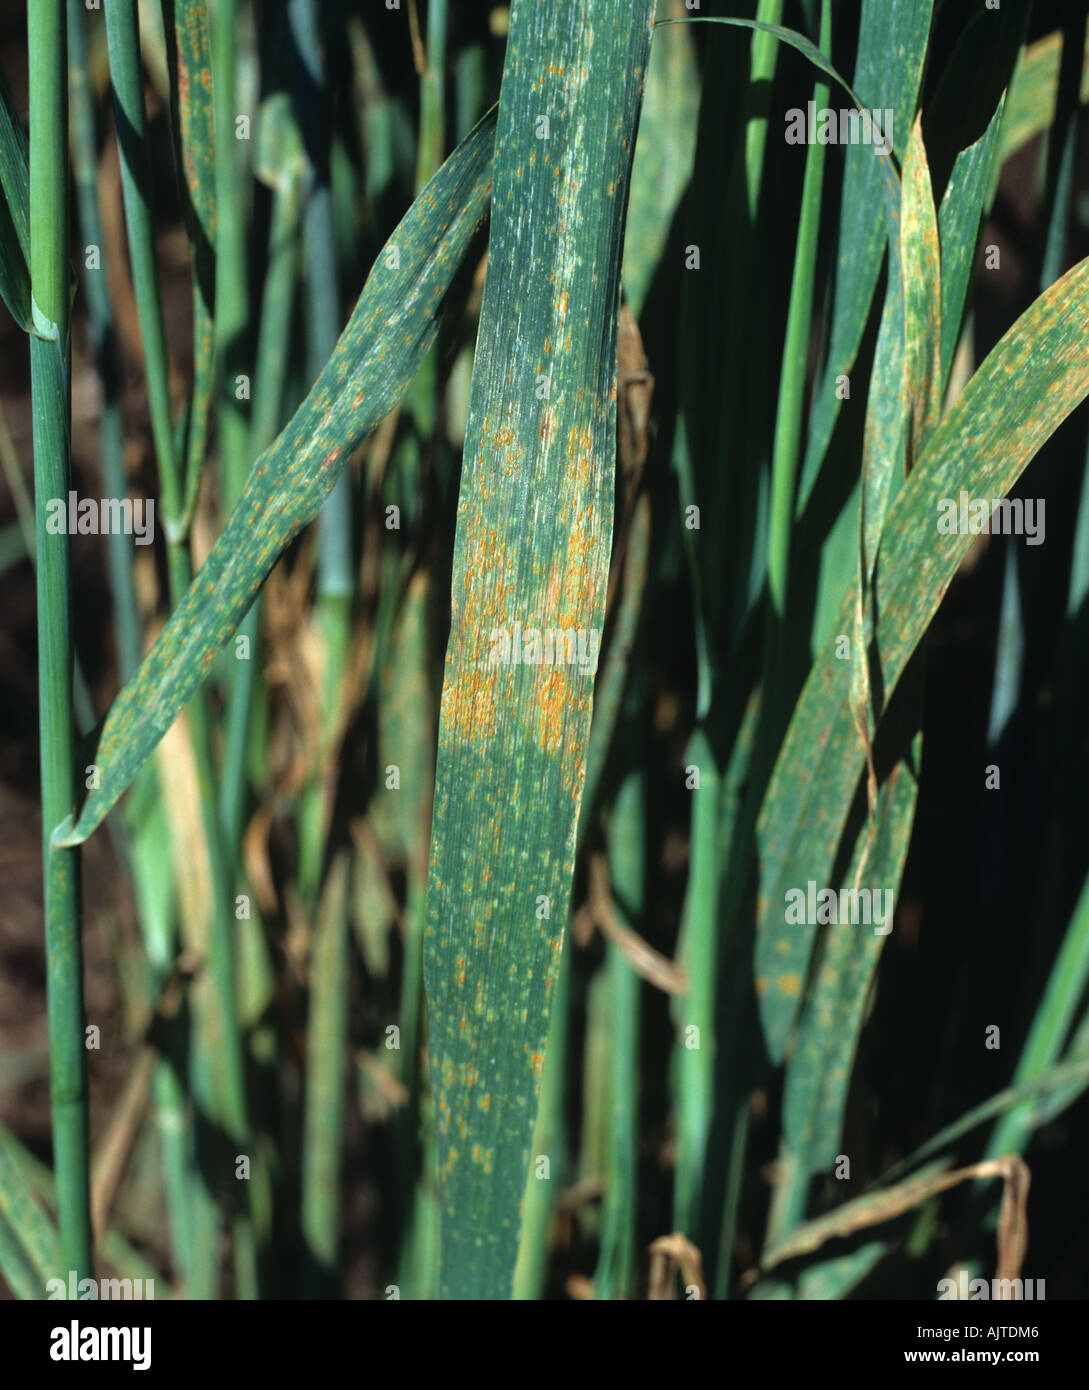 Crown rust Puccinia coronata infection on oats crop Stock Photo